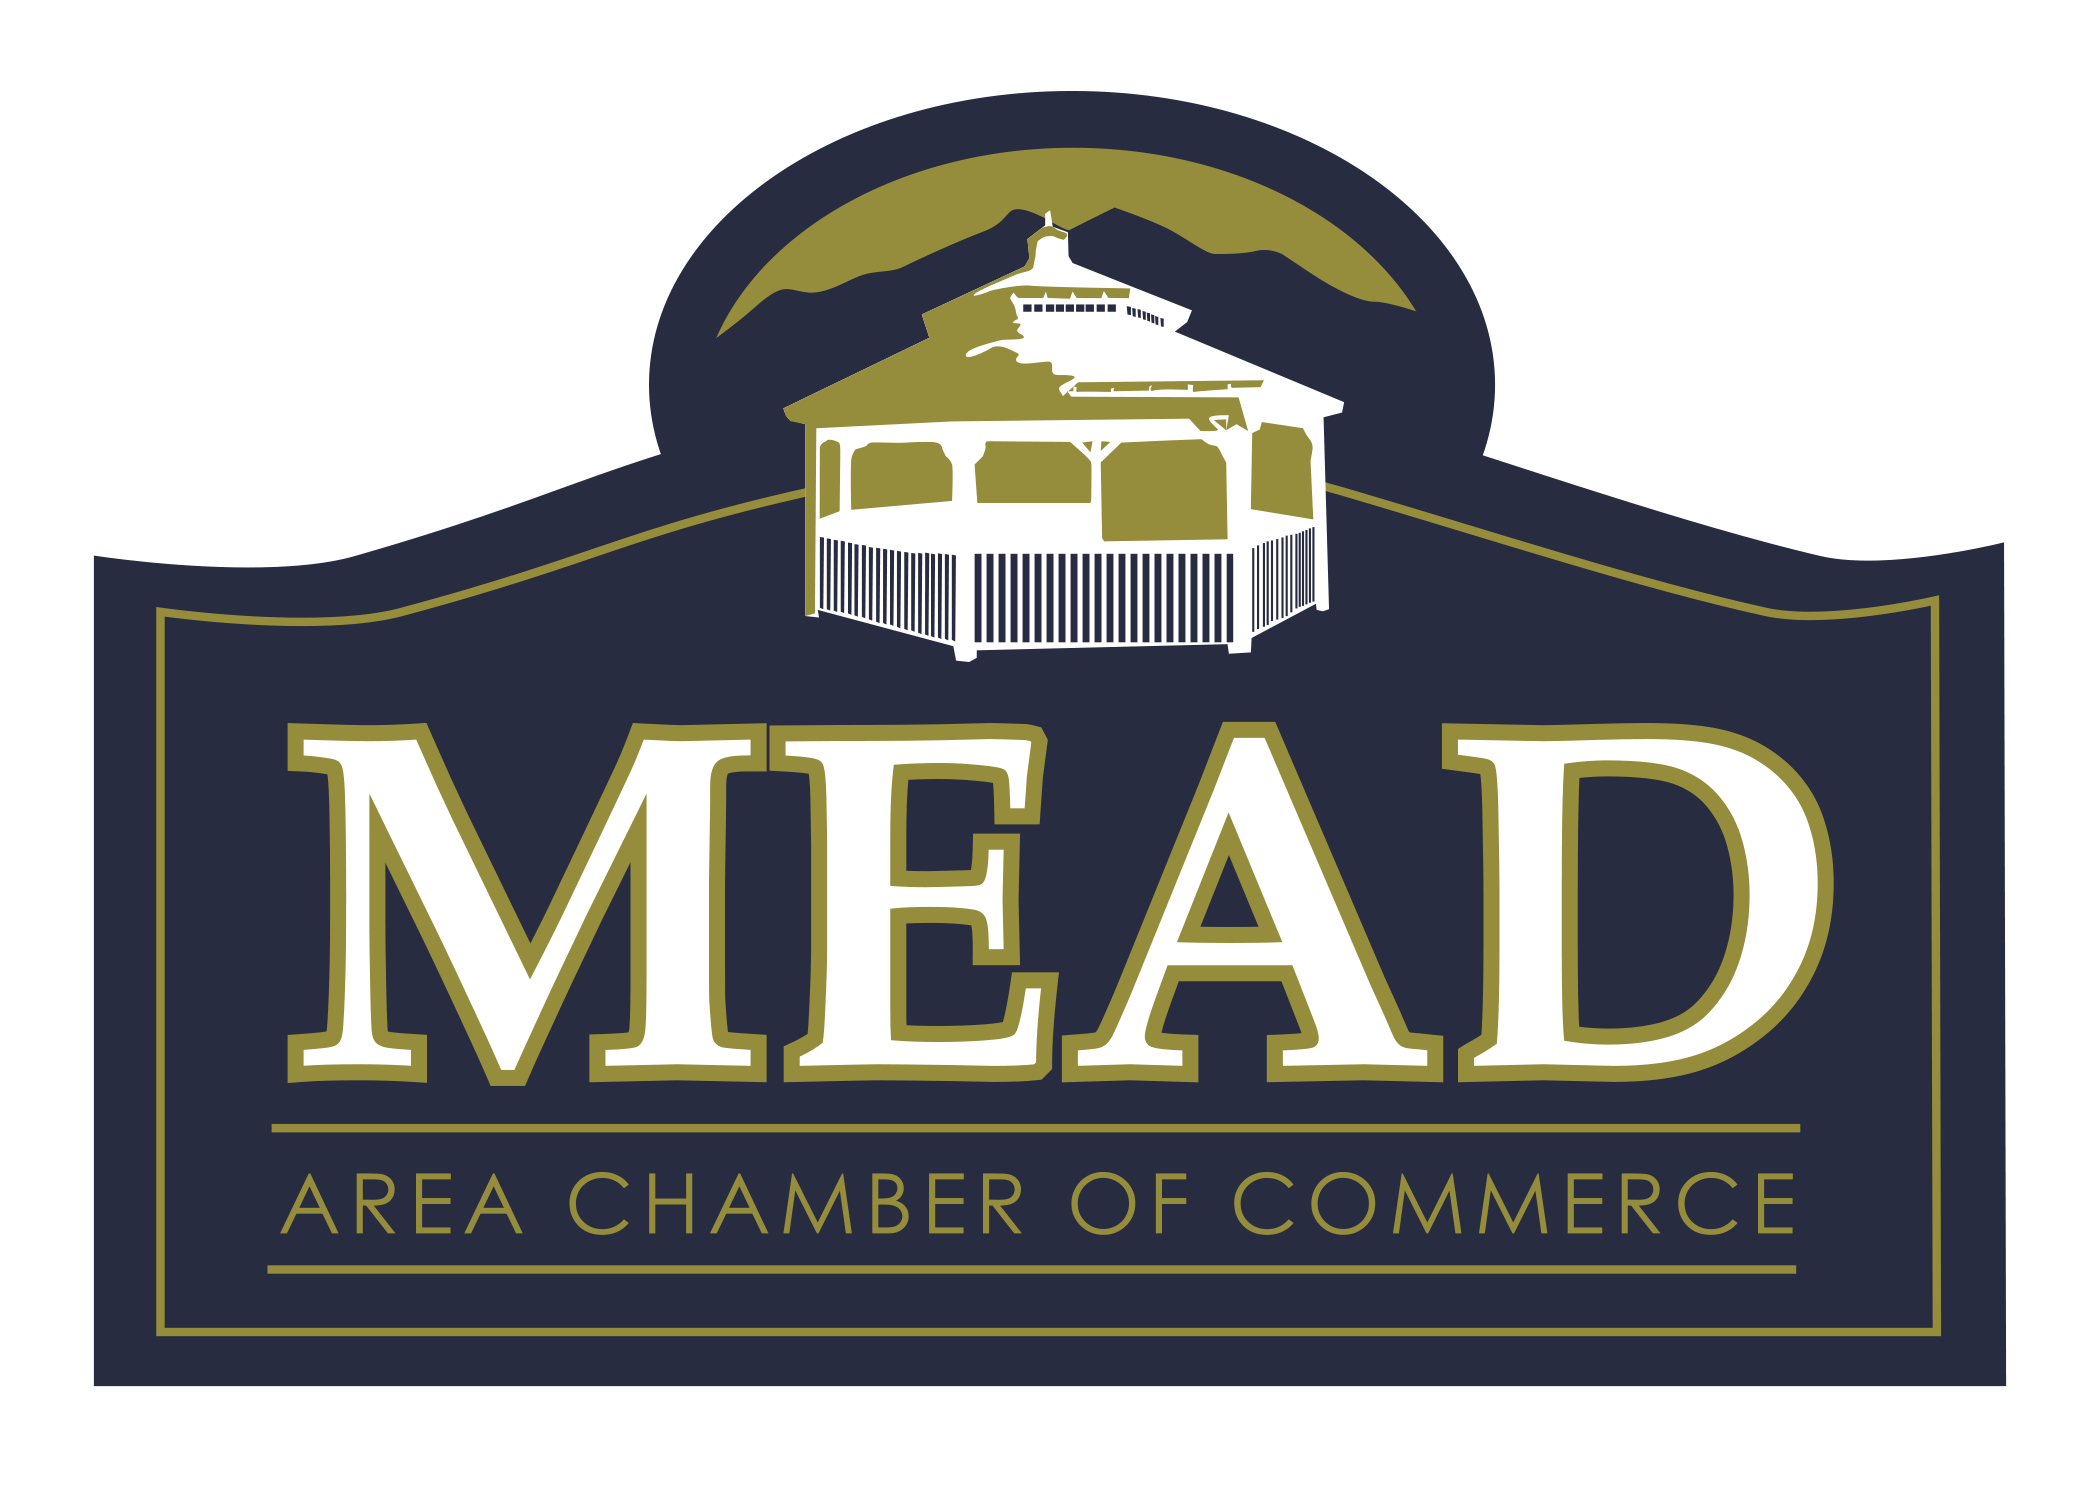 Mead Chamber of Commerce seal